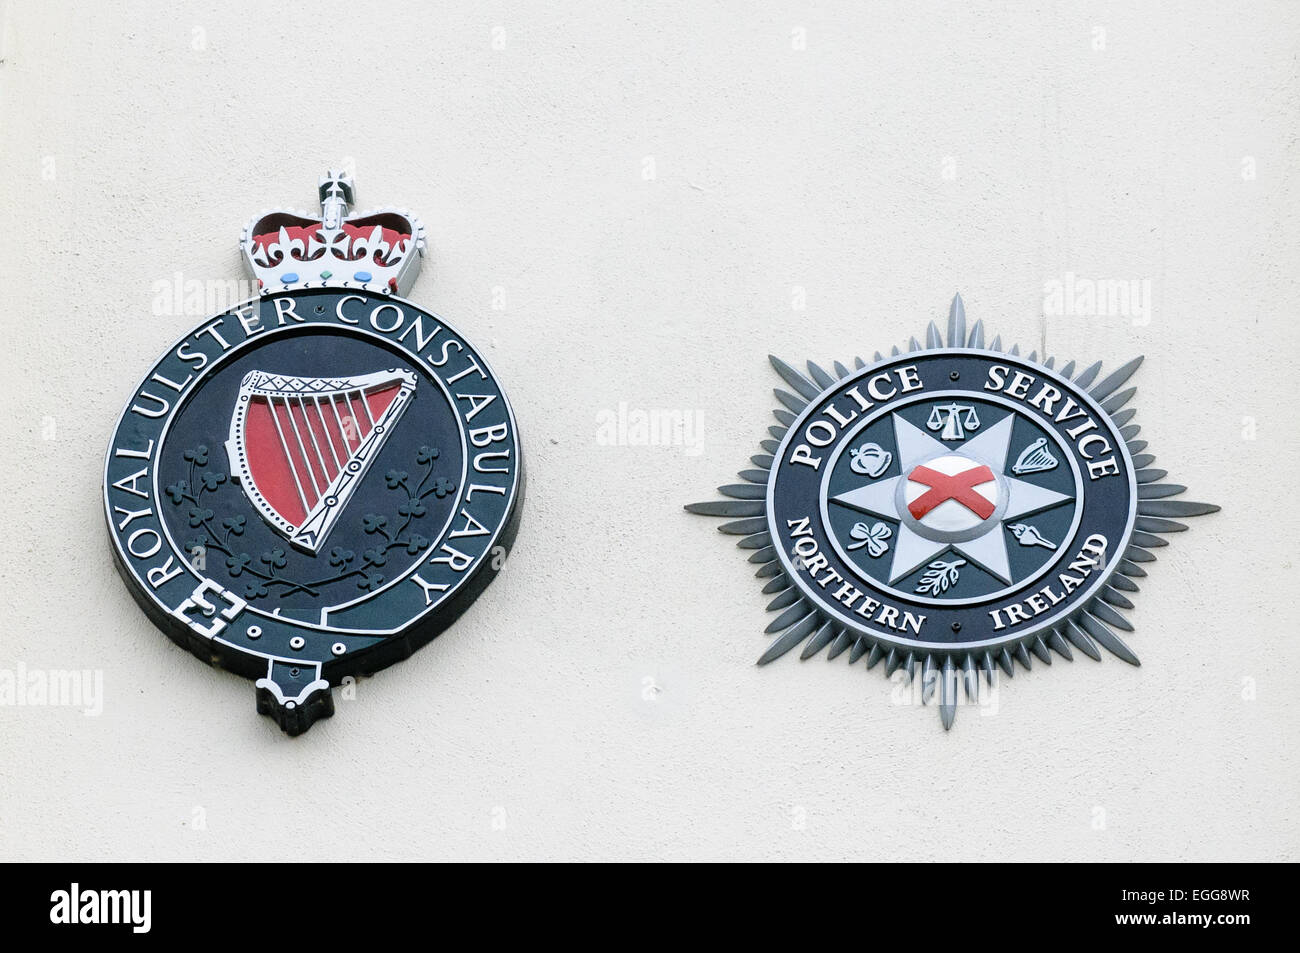 Royal Ulster Constabulary (RUC) and PSNI logos side by side Stock Photo